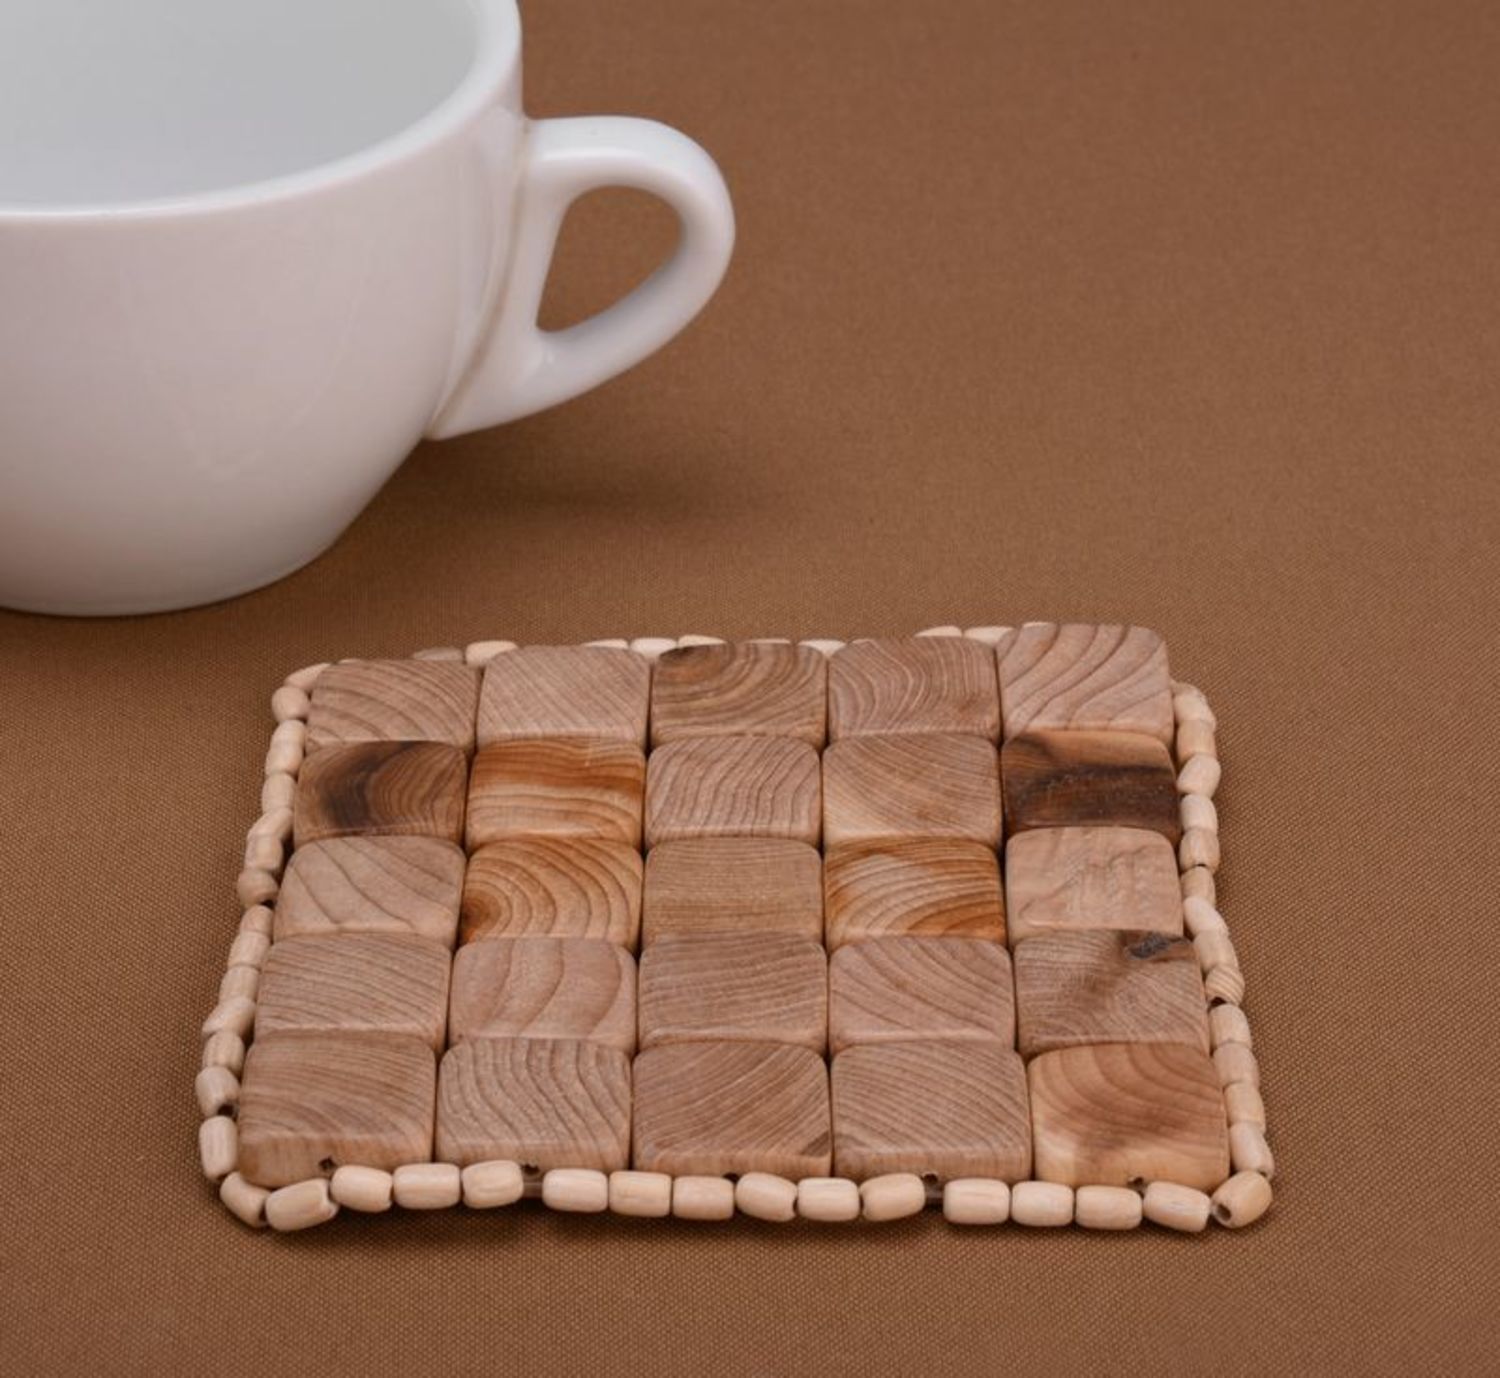 Square coaster for hot dishes photo 4